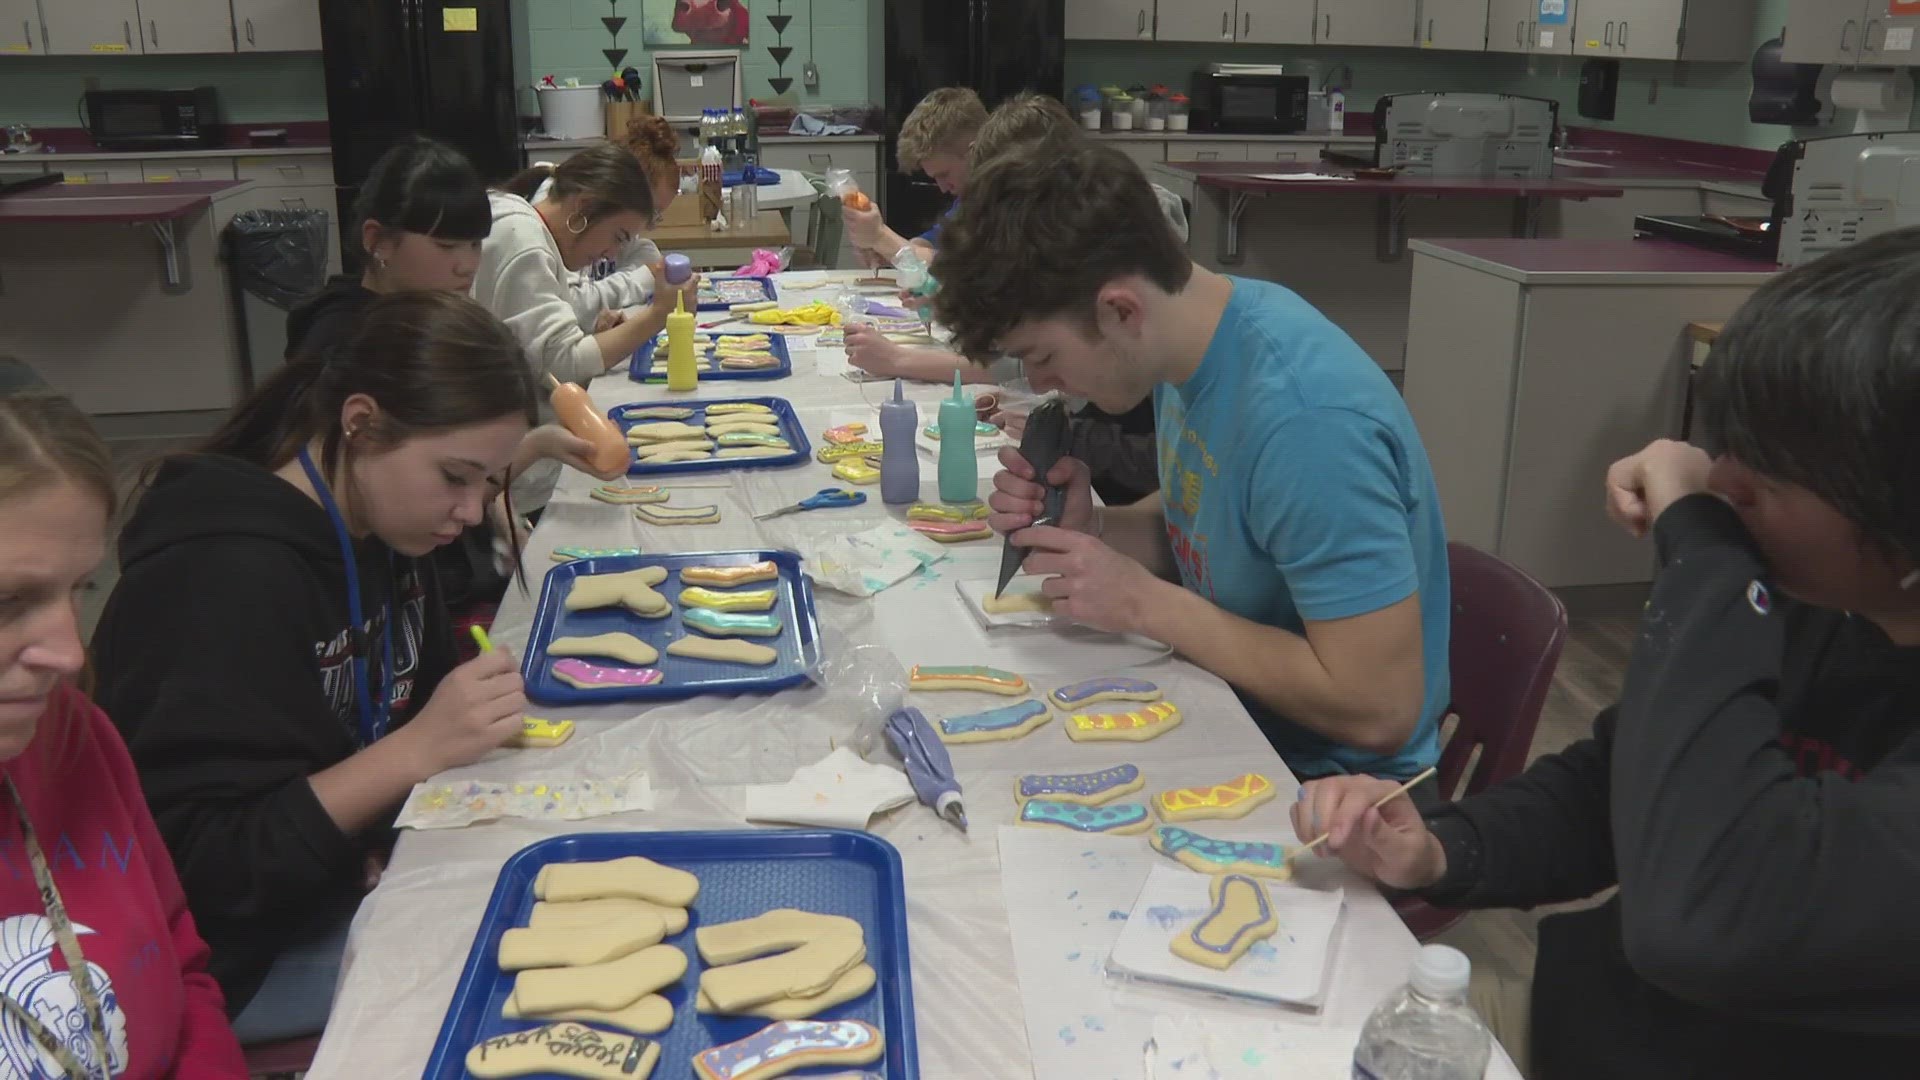 Christian Academy students baked over 400 cookies which they will give to students in their providence school for World Down Syndrome Day.